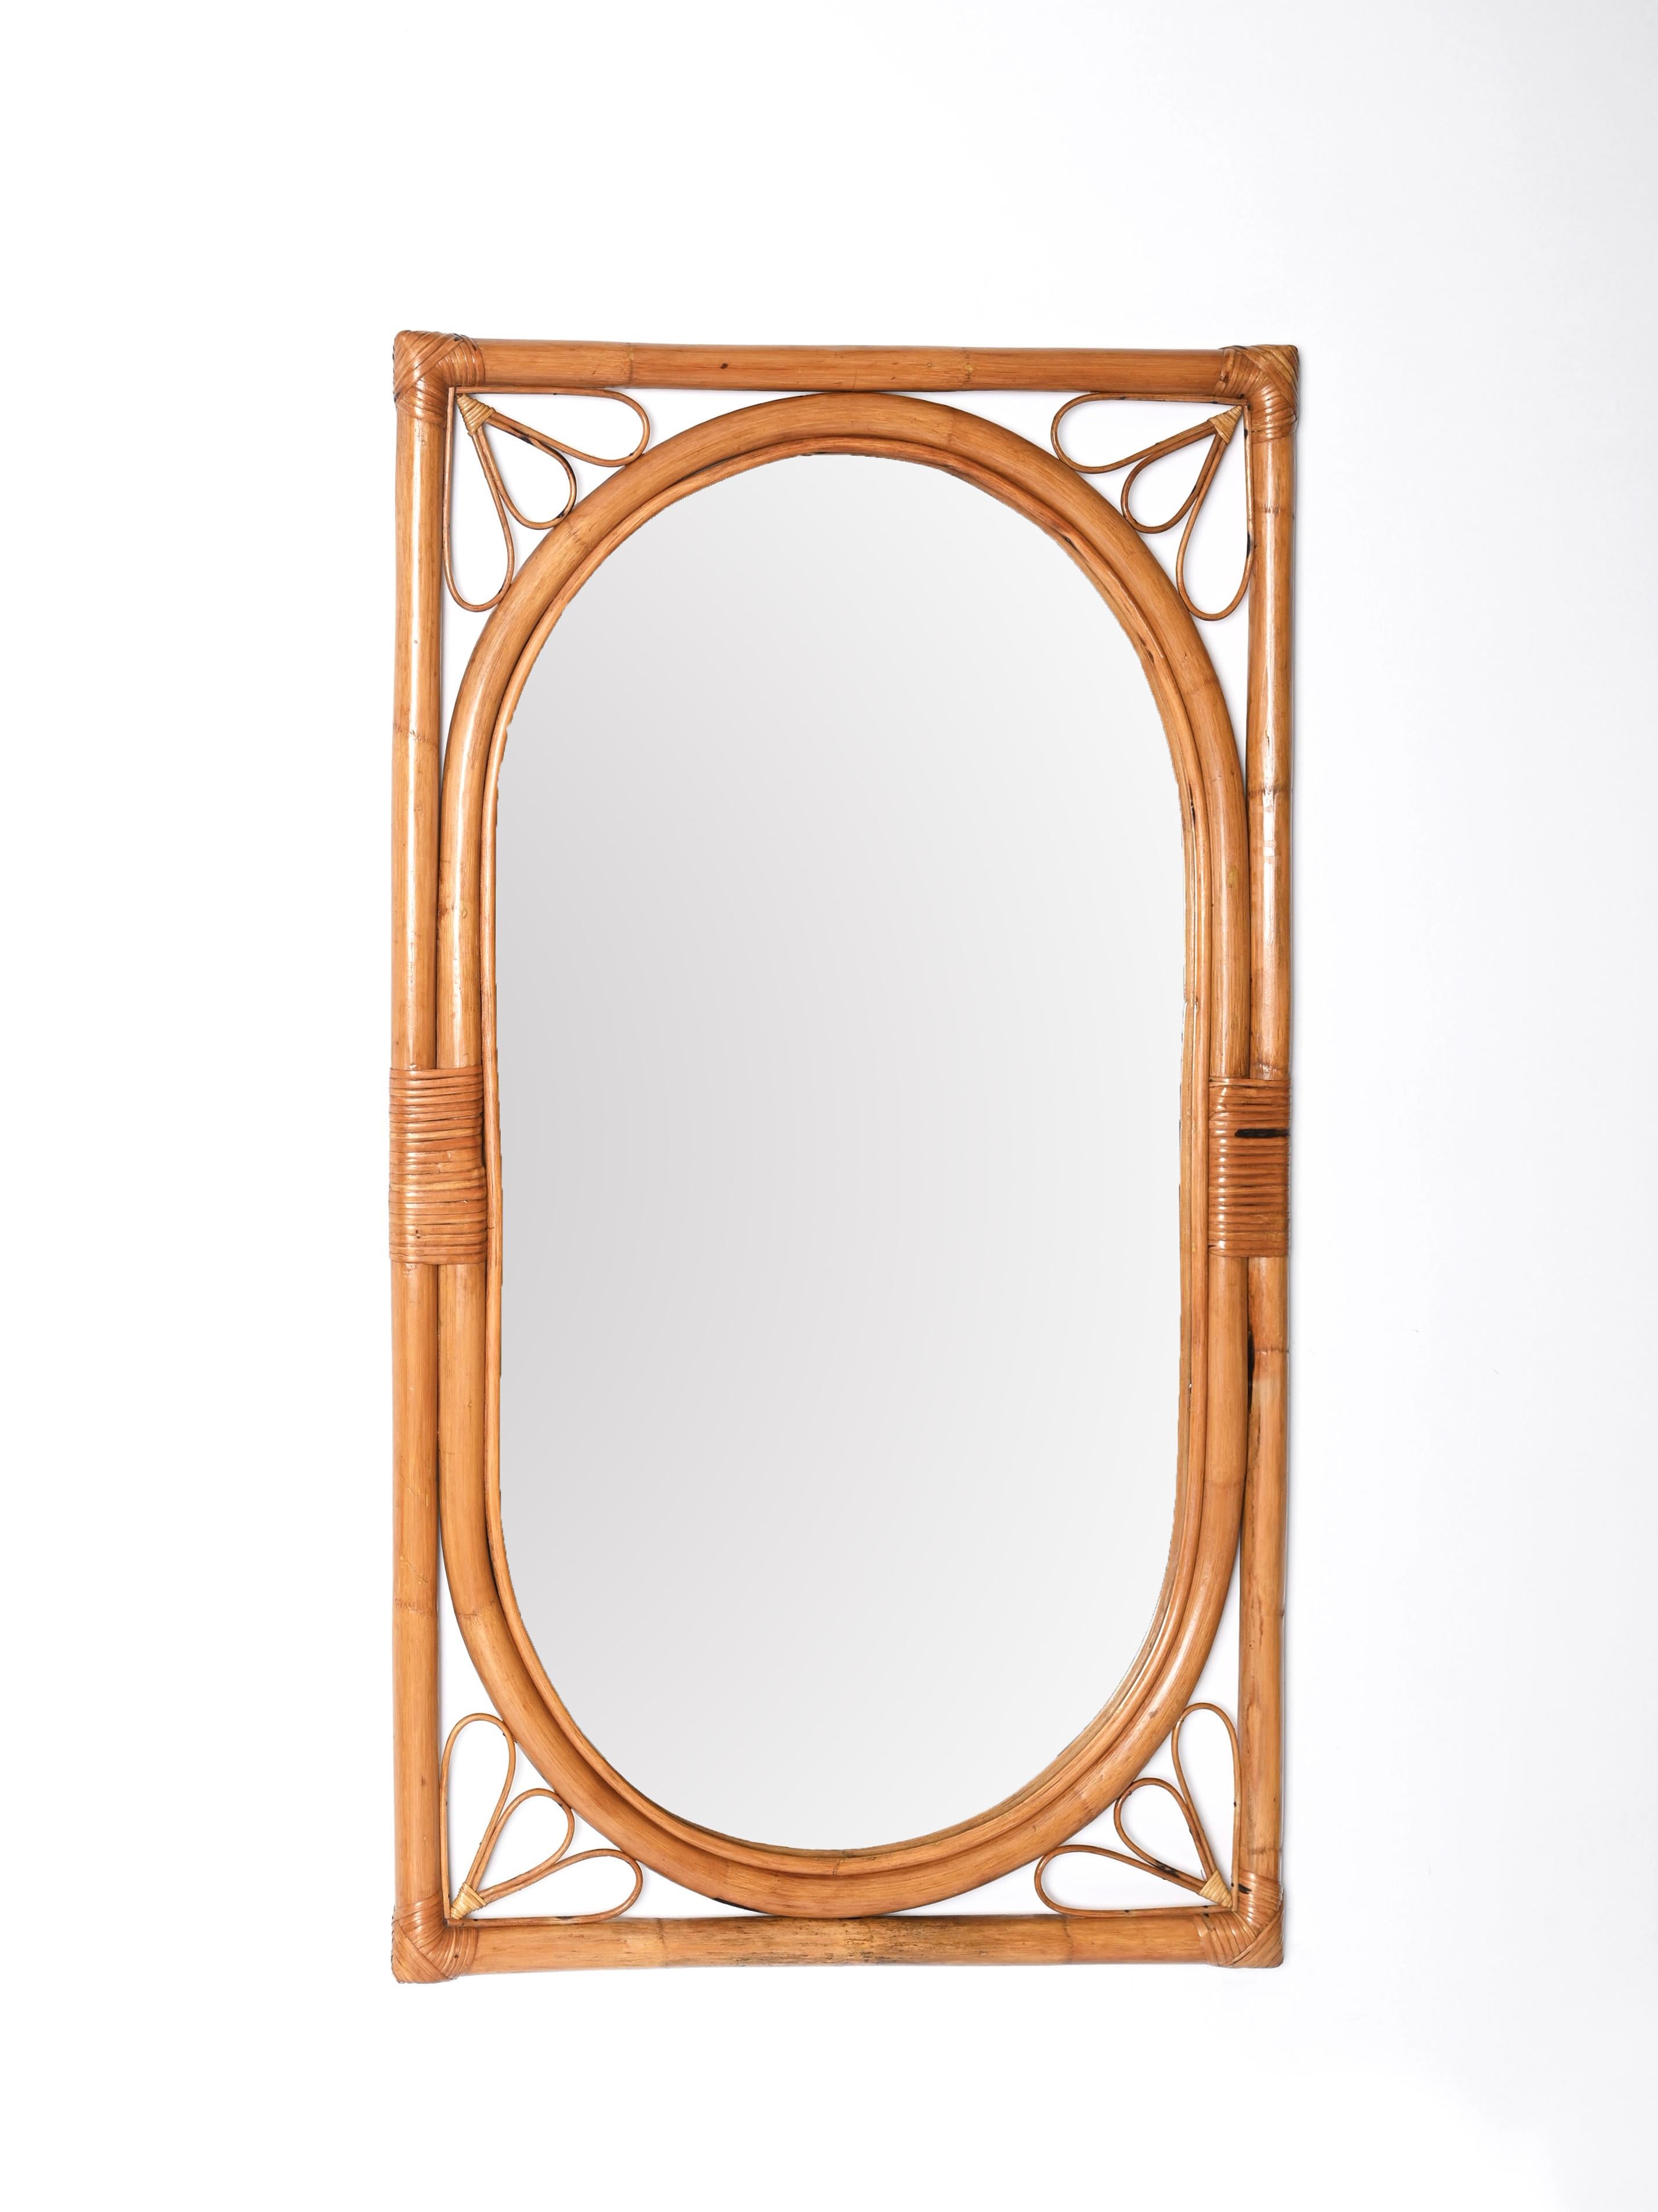 Midcentury Italian Mirror with Double Frame in Bamboo and Rattan, 1970s 1